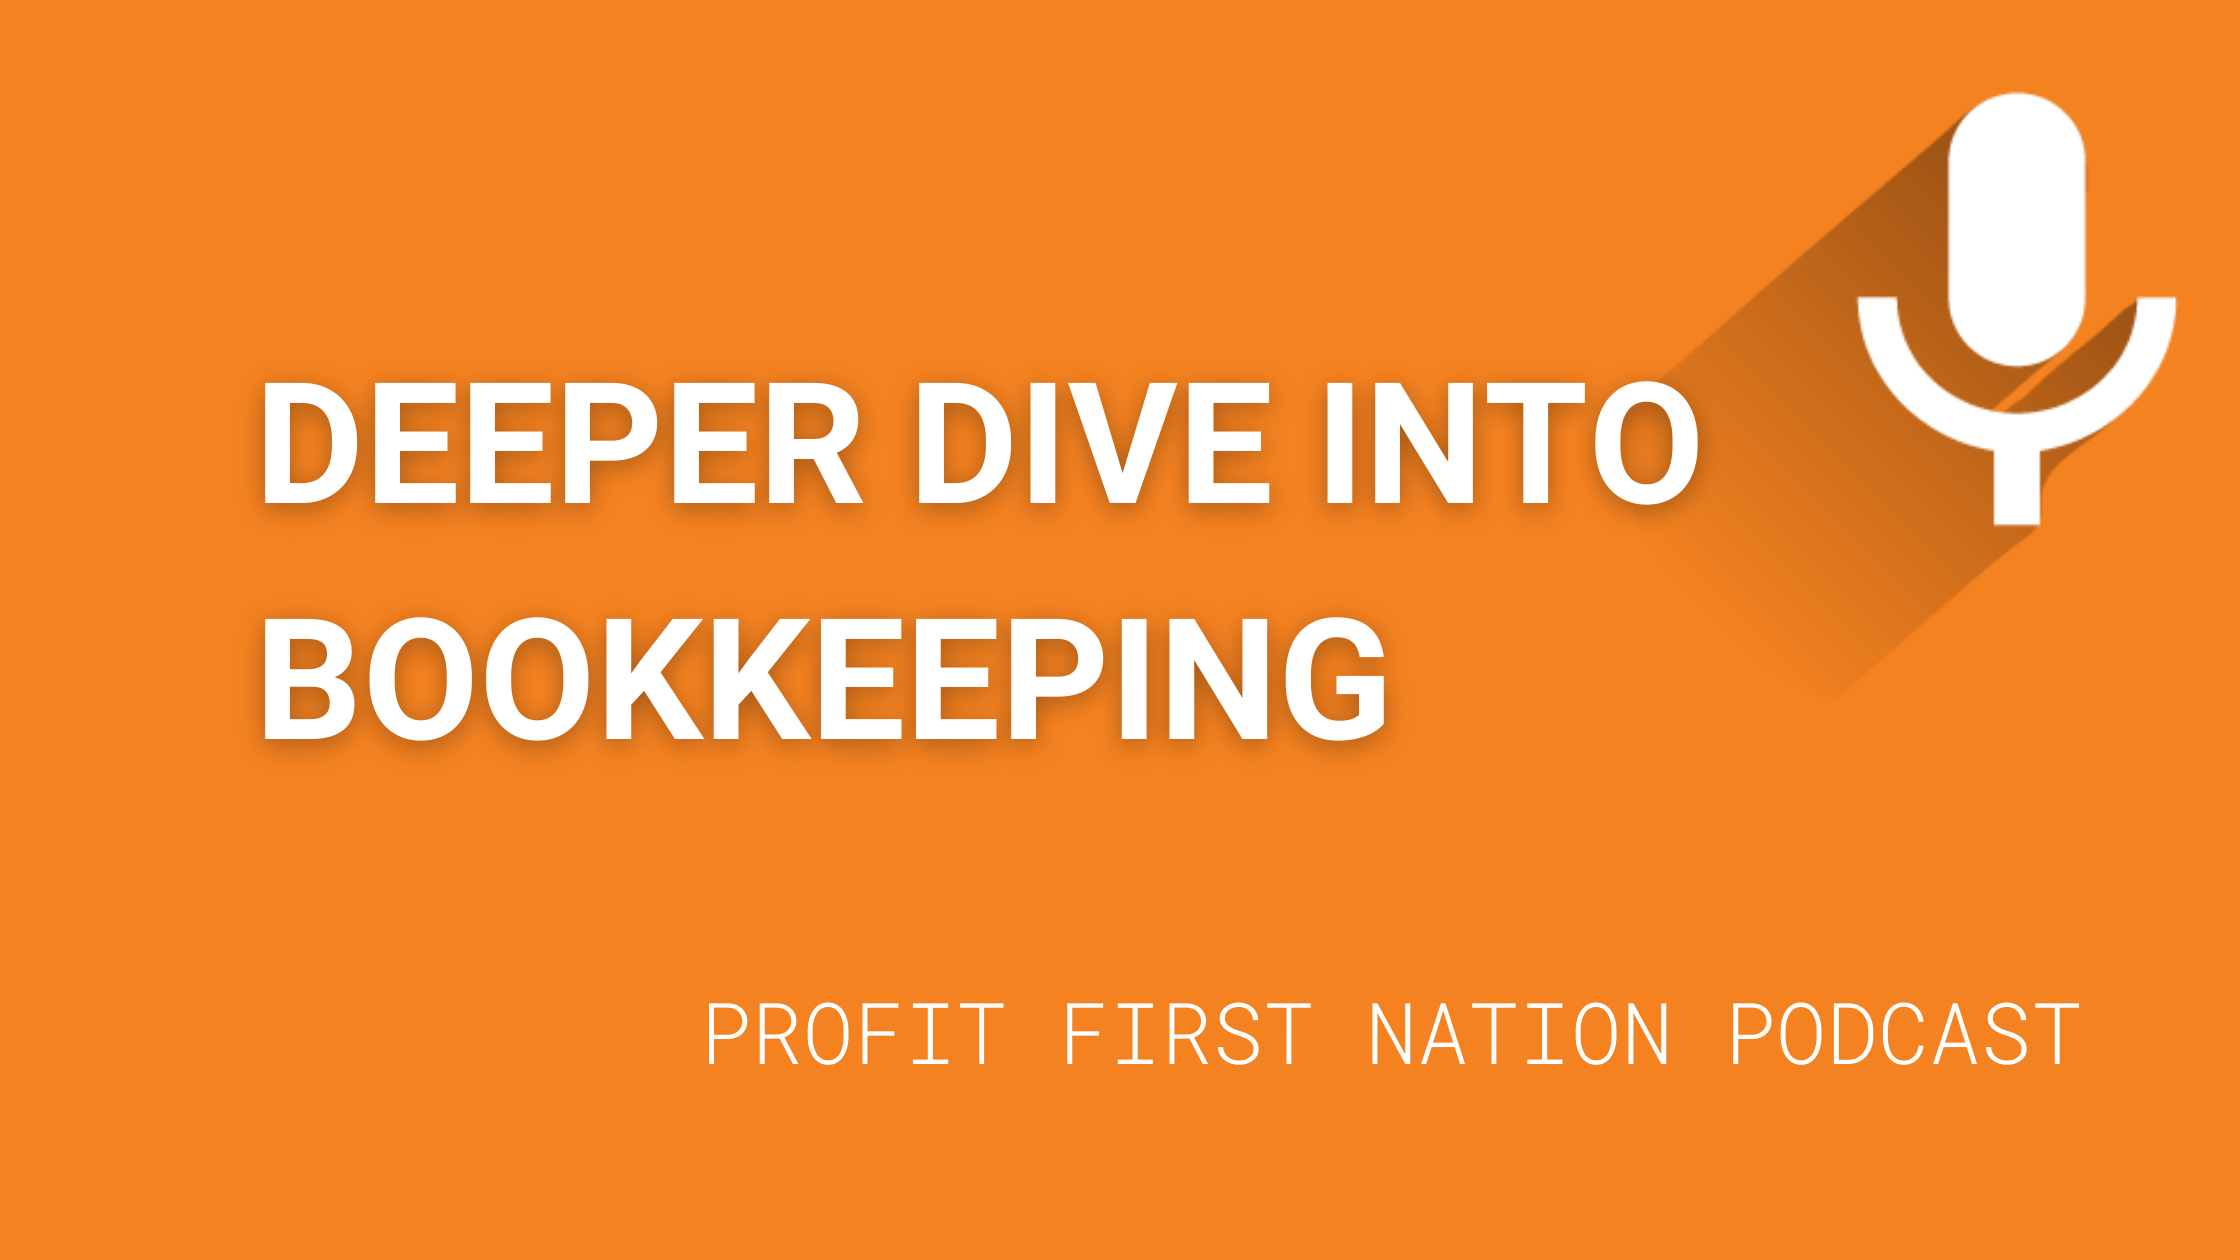 Deep dive into bookkeeping